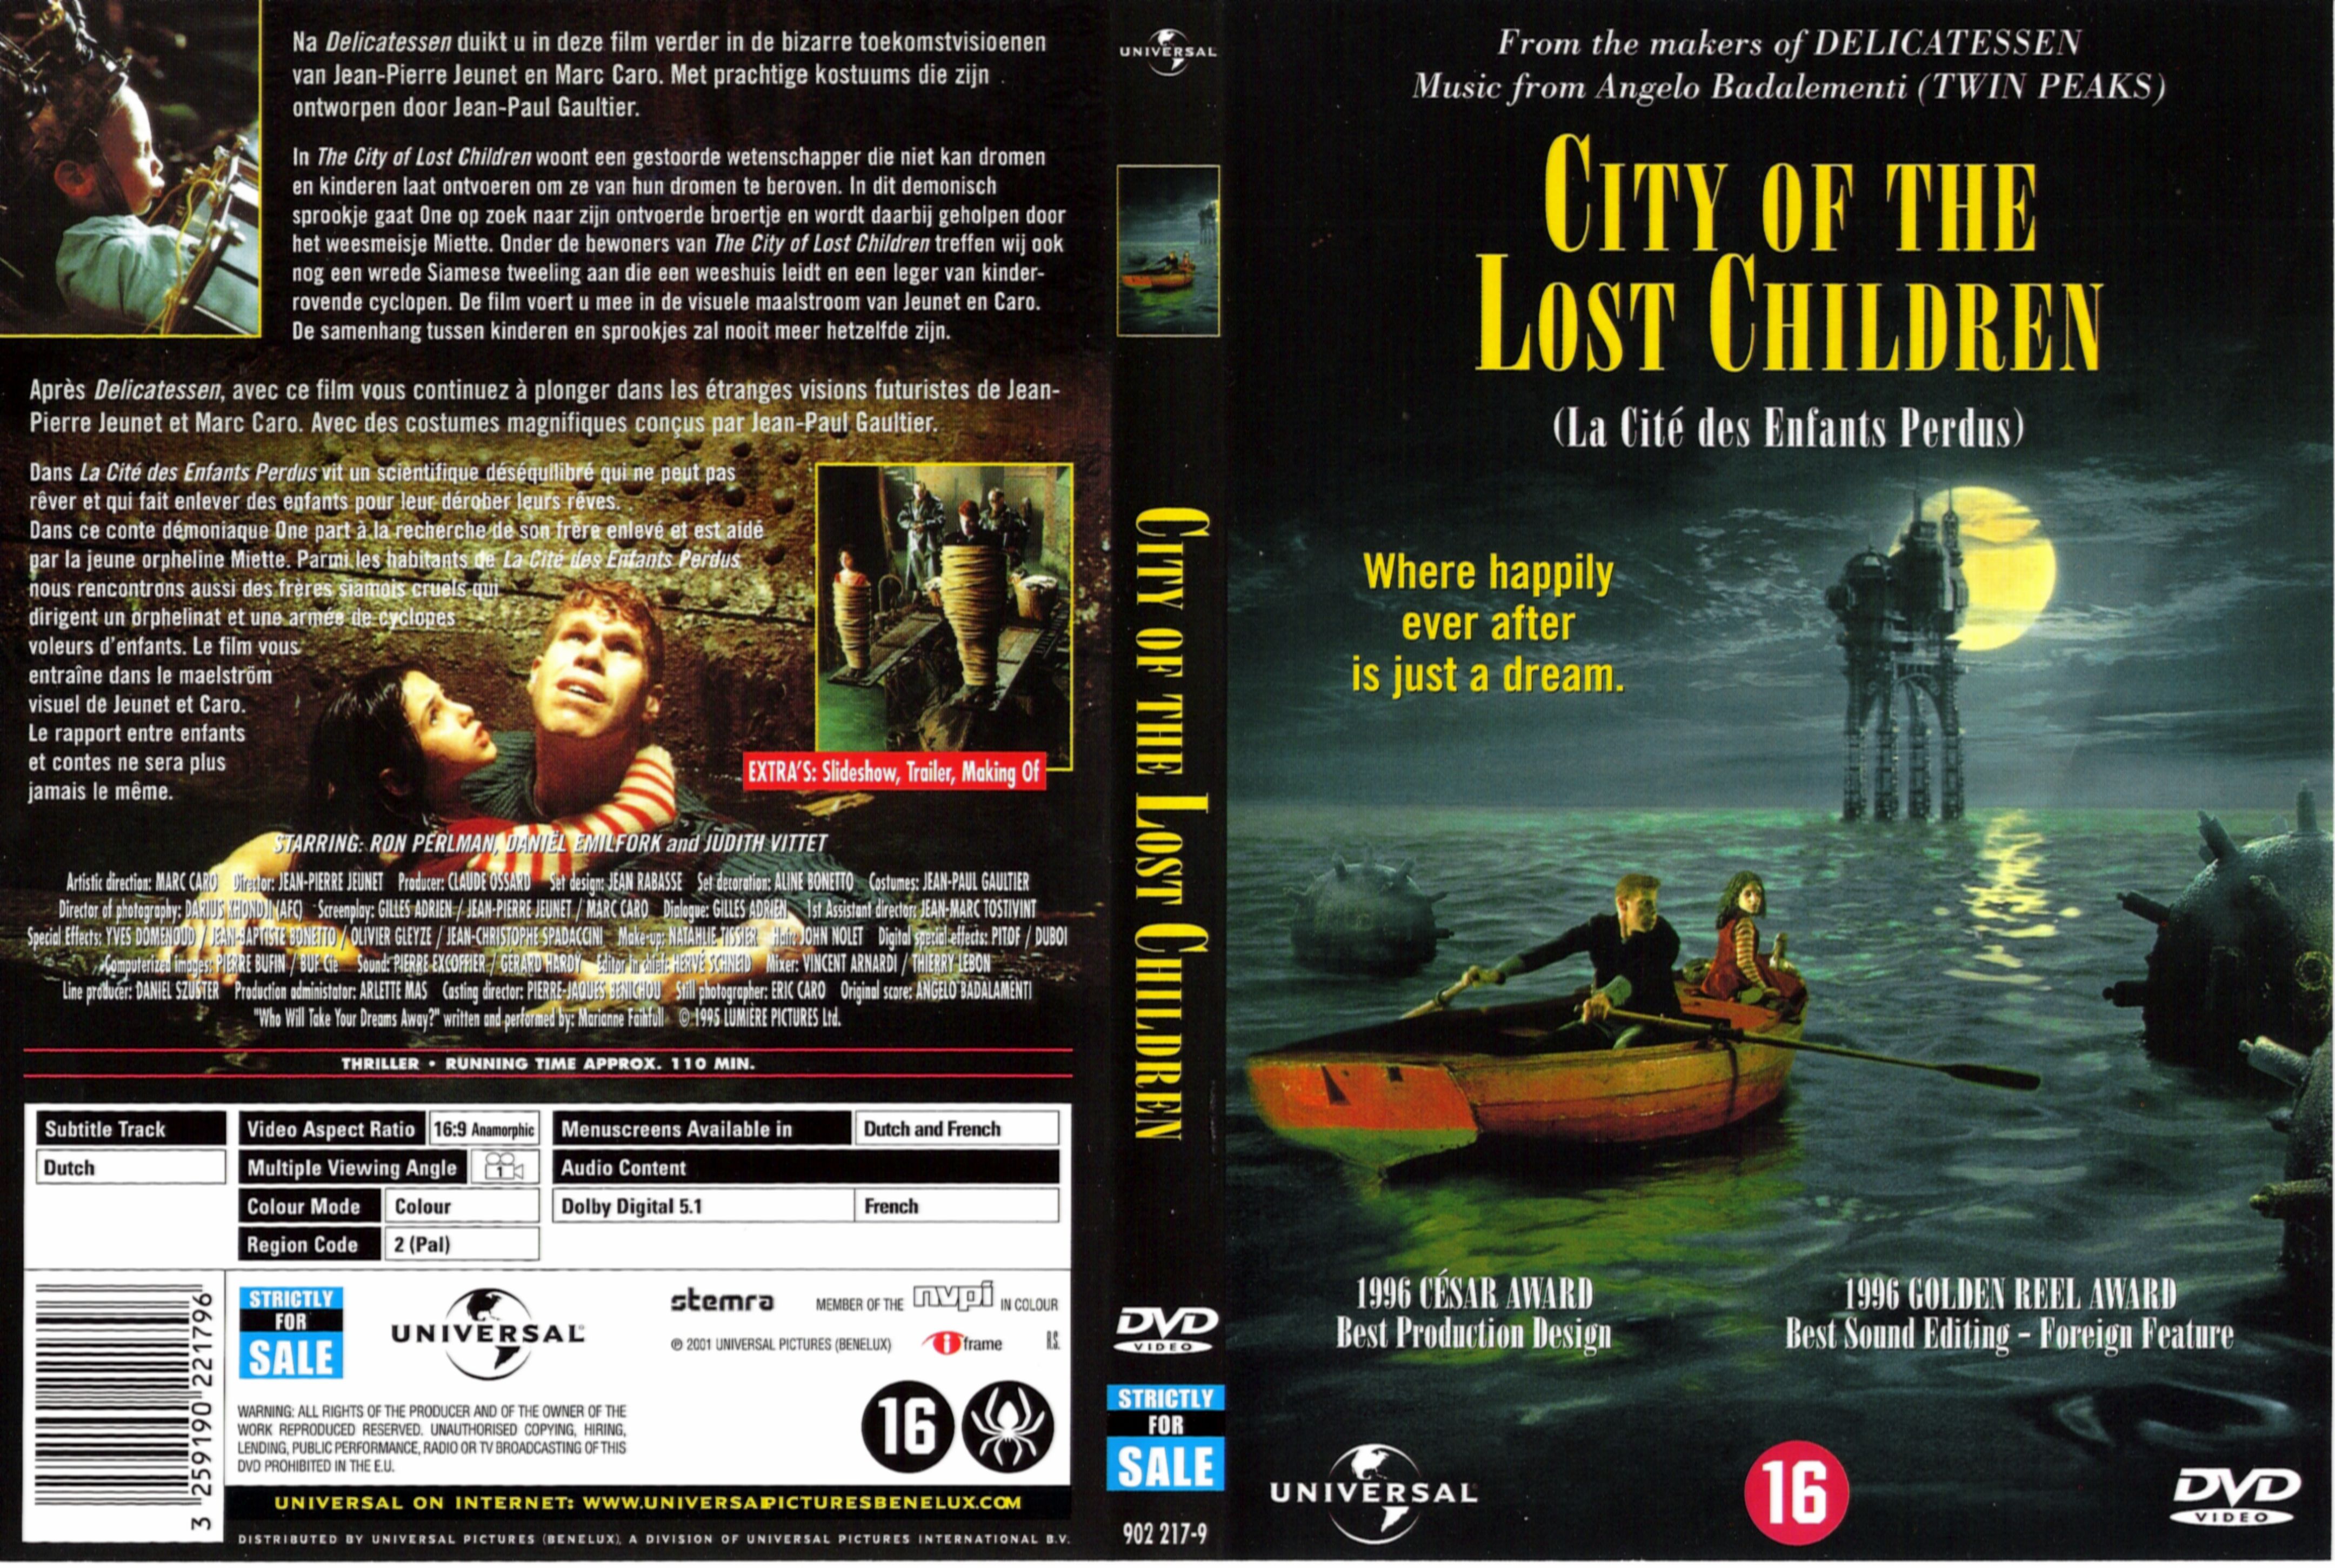 Jaquette DVD City of the lost children